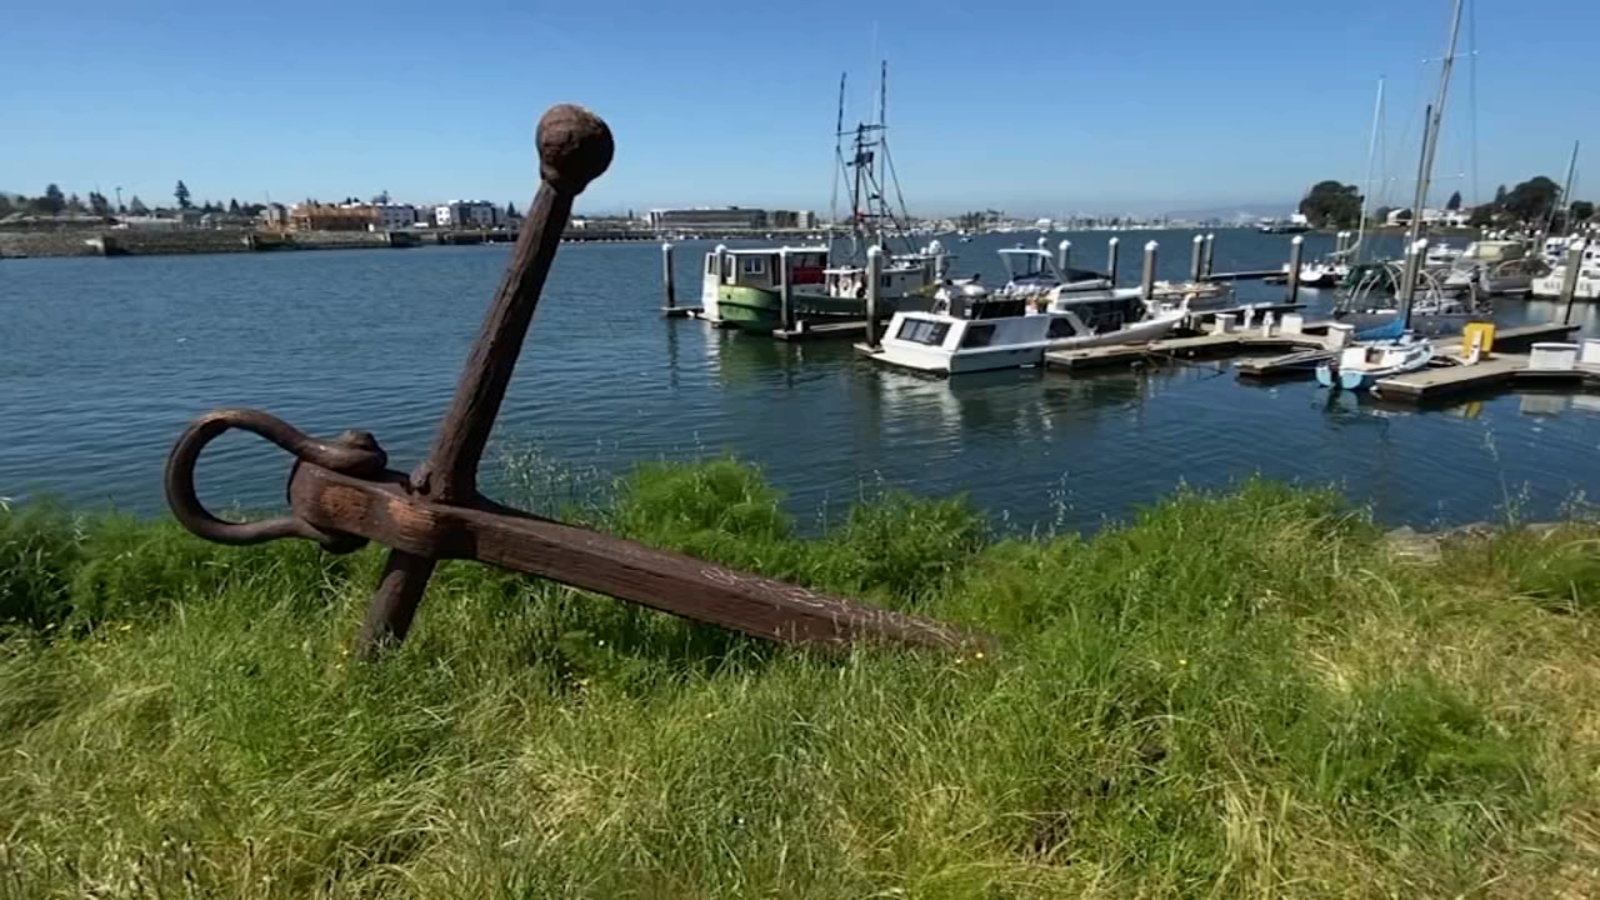 ‘Pirate’ crime crackdown at Oakland Estuary shows progress, but some say it’s not enough [Video]